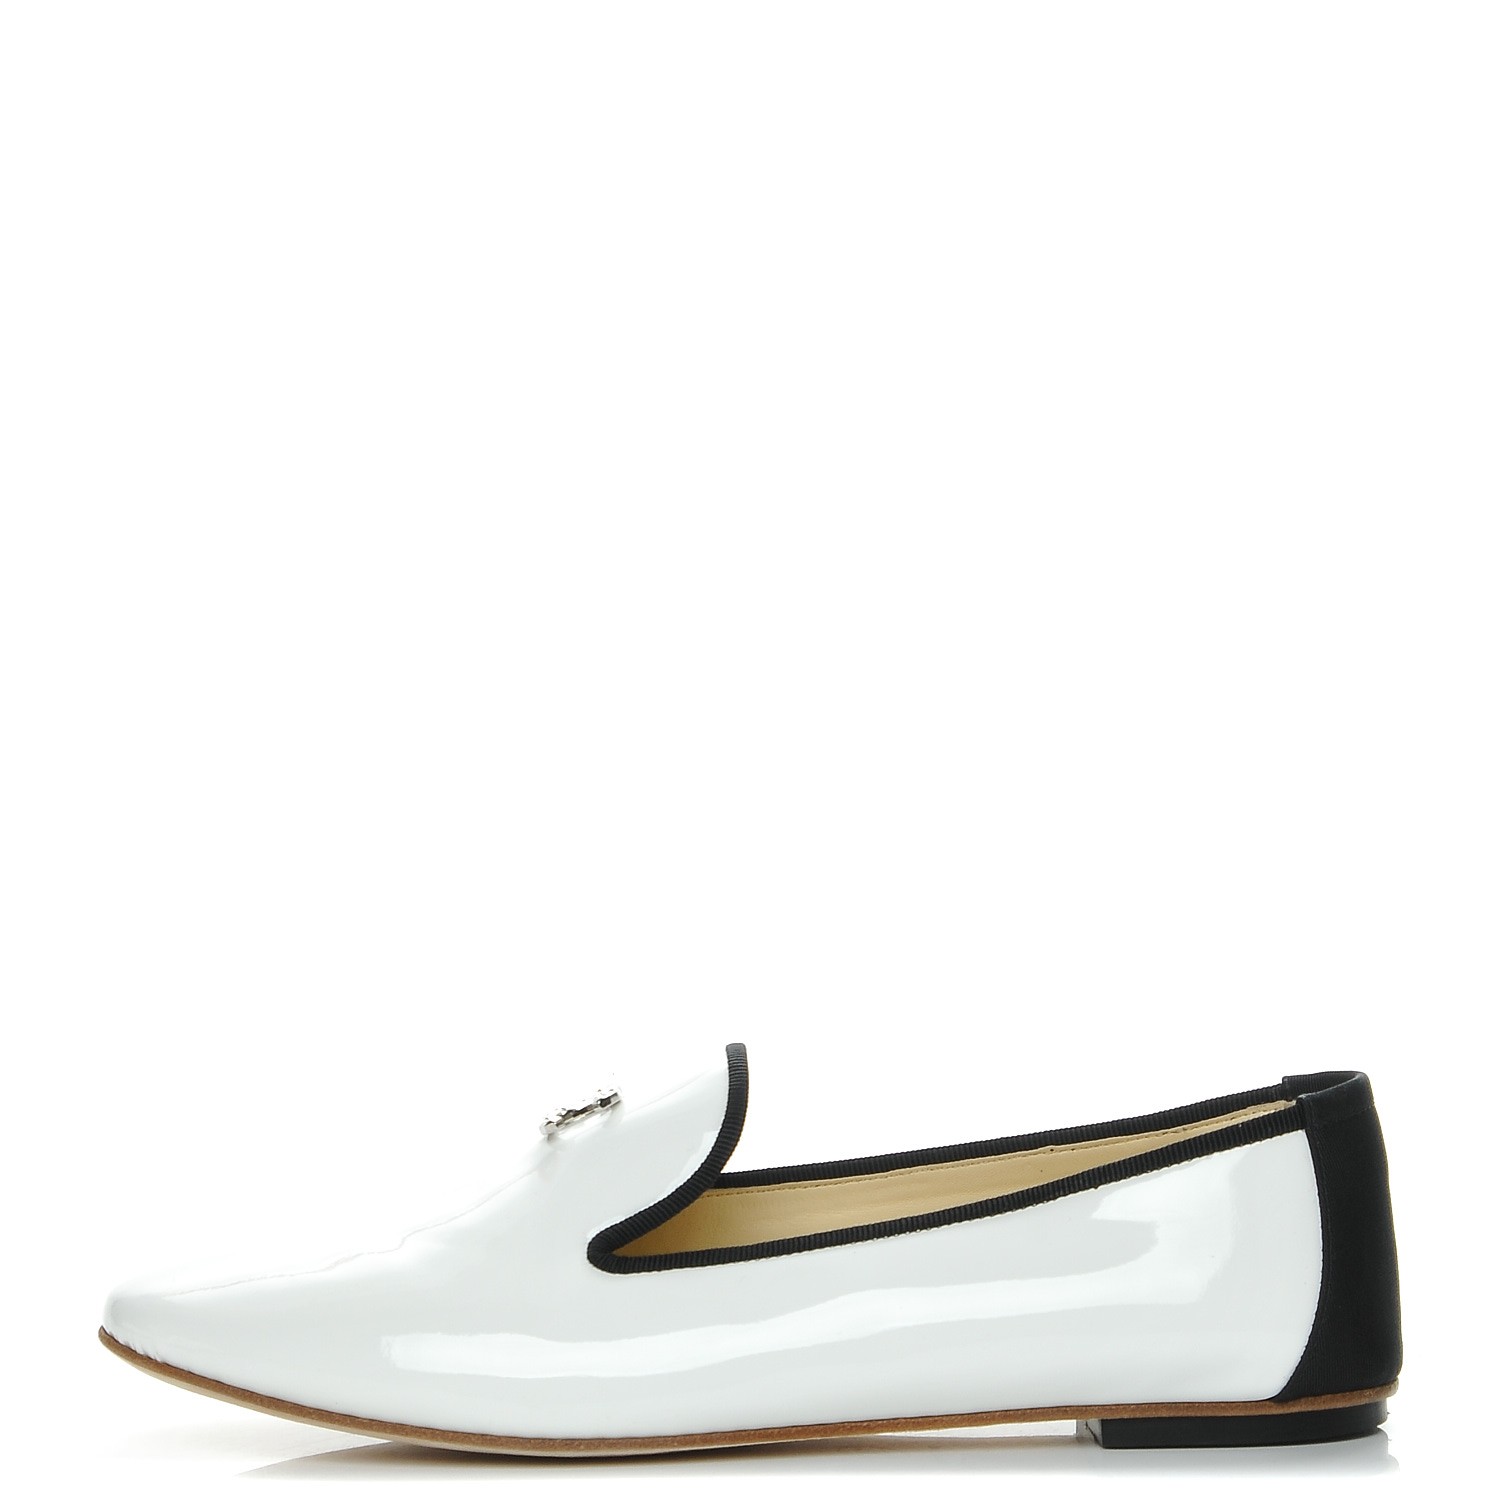 CHANEL Patent CC Loafers 39 White 209393